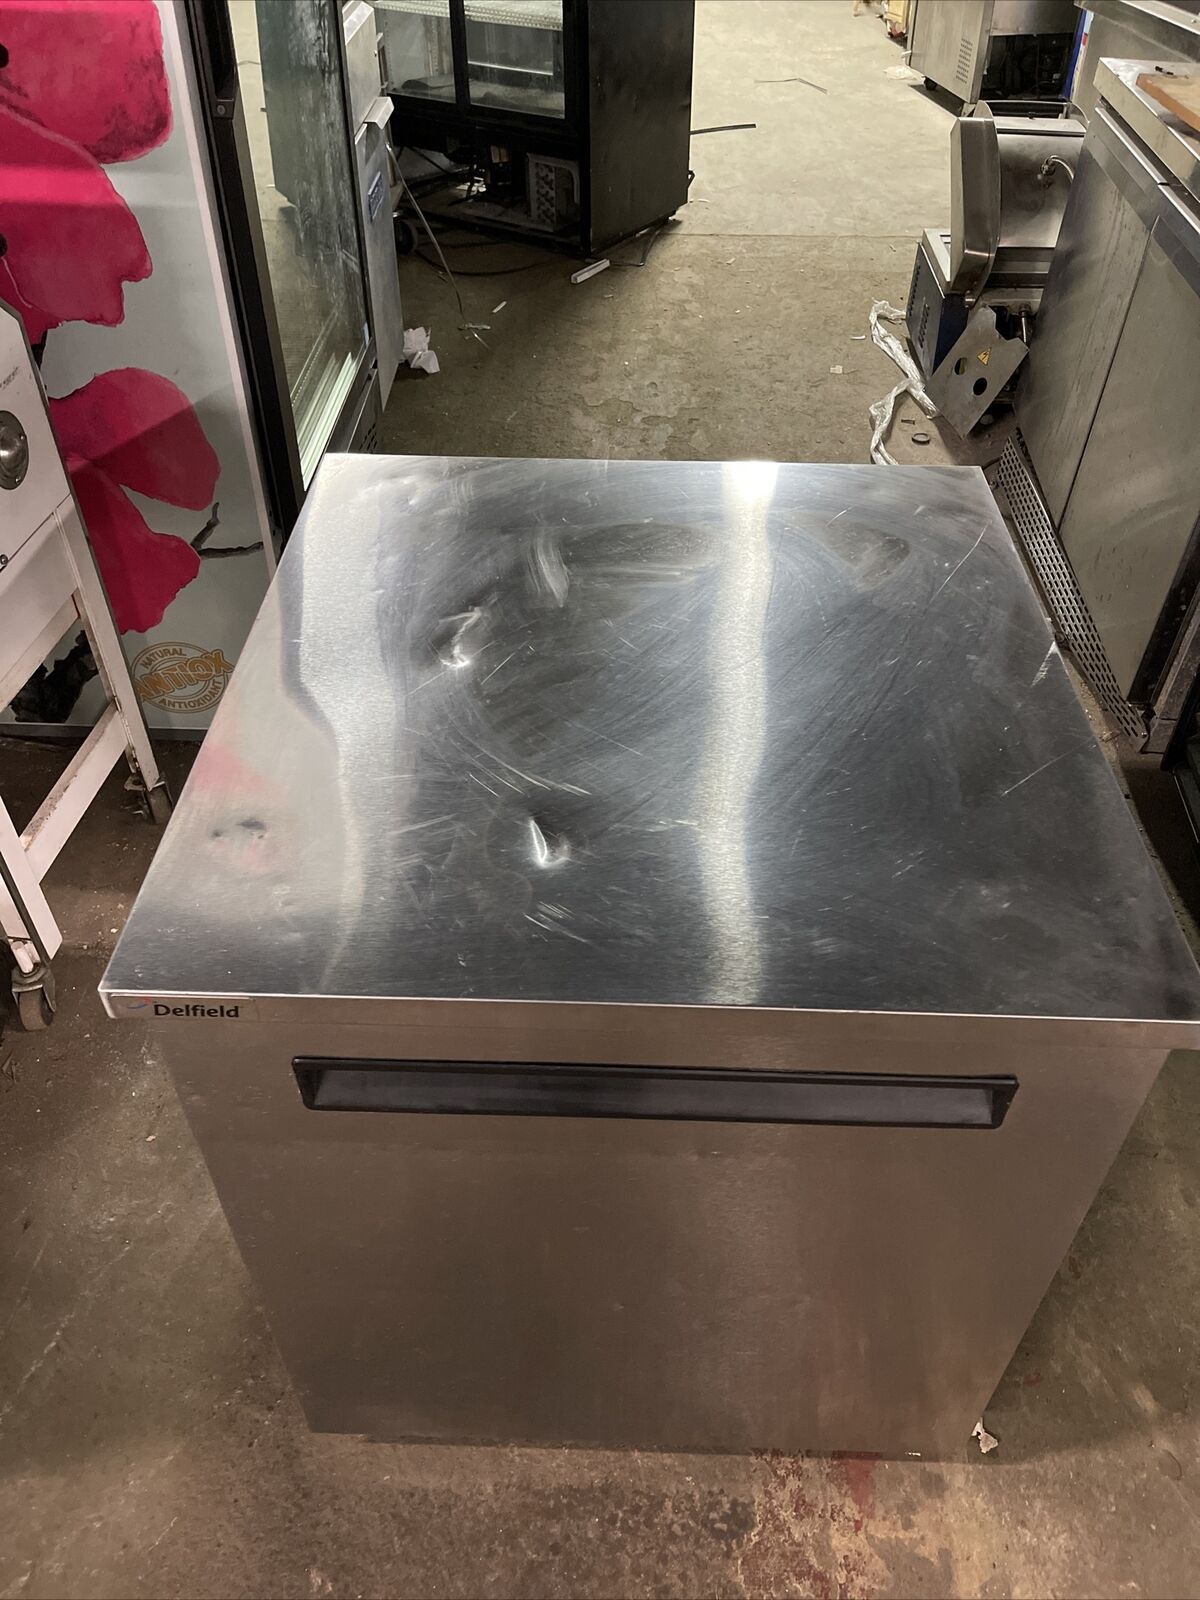 DELFIELD 406-STAR4 USED 27” COMMERCIAL UNDERCOUNTER REFRIGERATOR COOLER